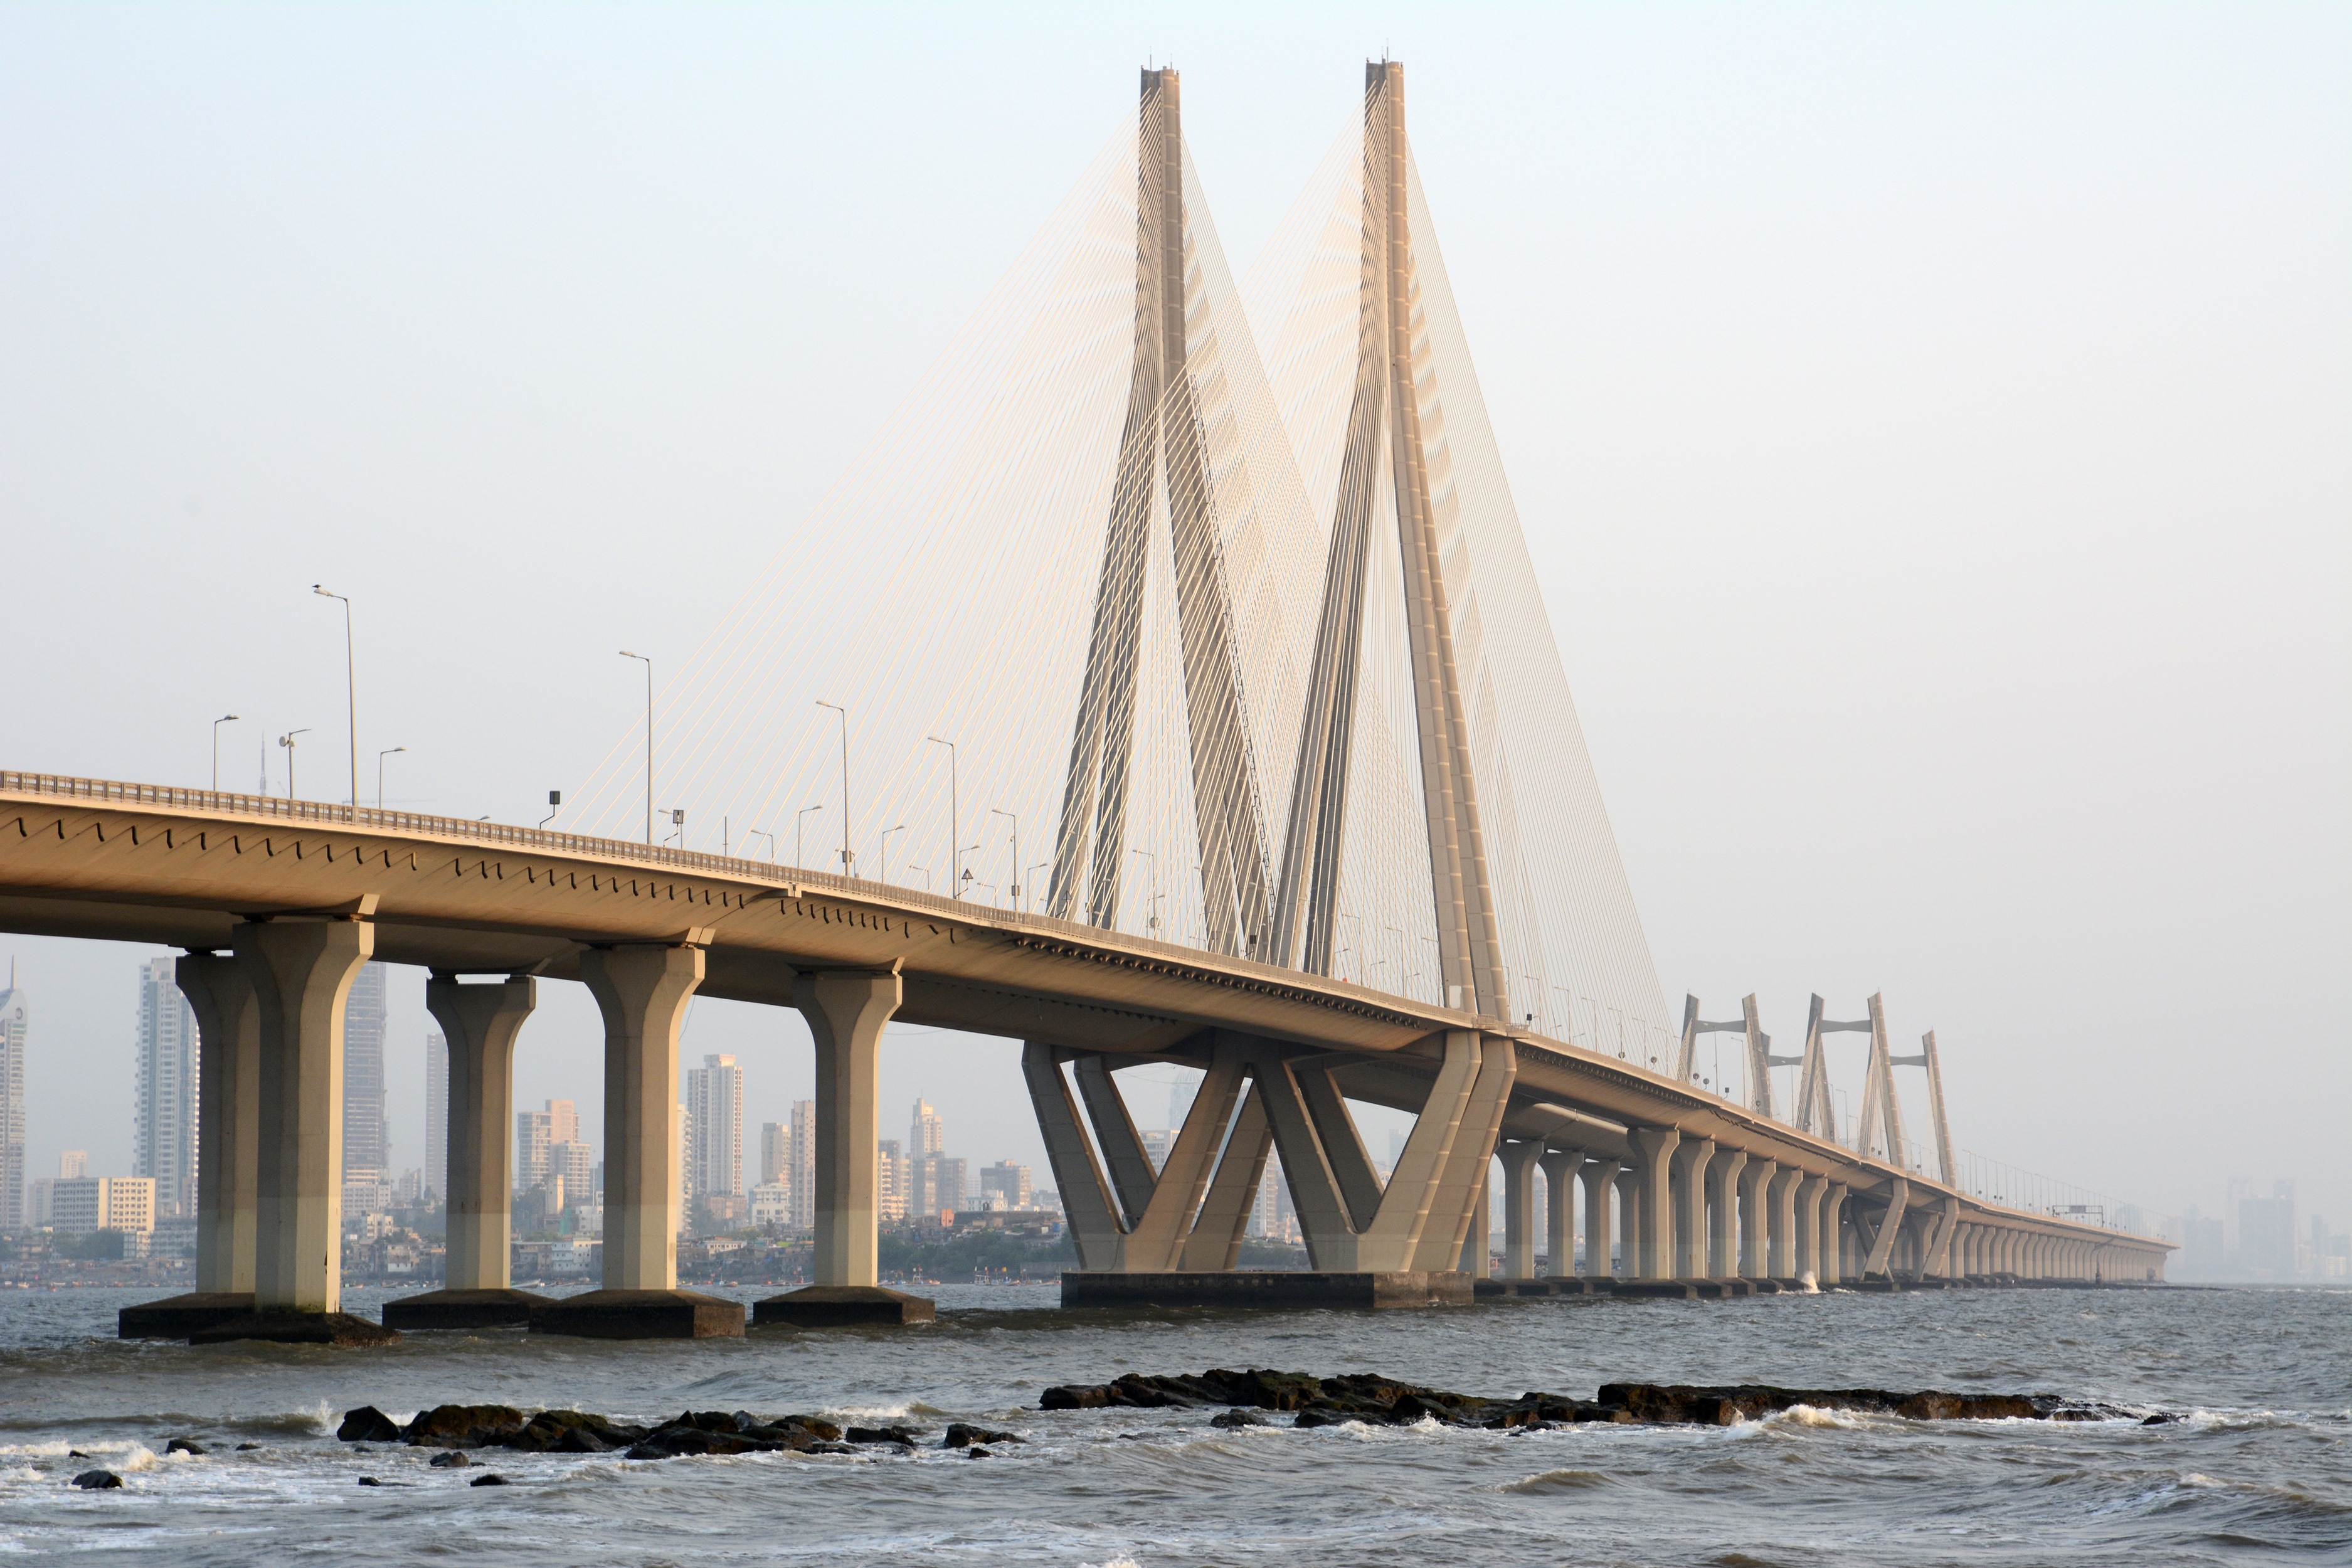 Bandraworli Sea Link One of the Top Attractions in Mumbai, India